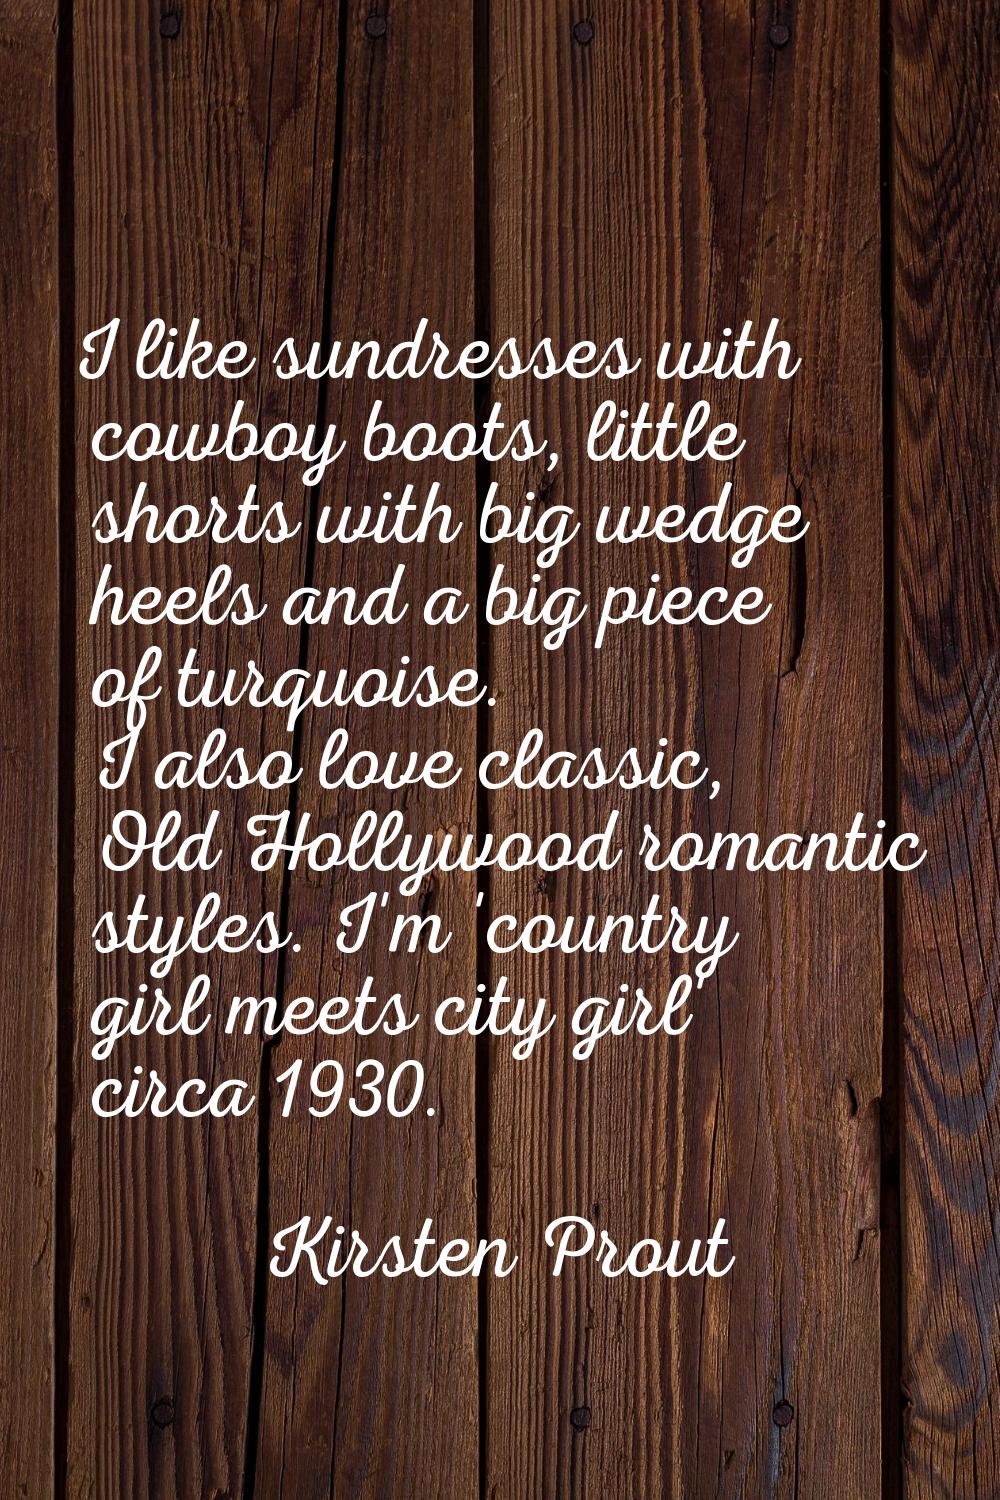 I like sundresses with cowboy boots, little shorts with big wedge heels and a big piece of turquois